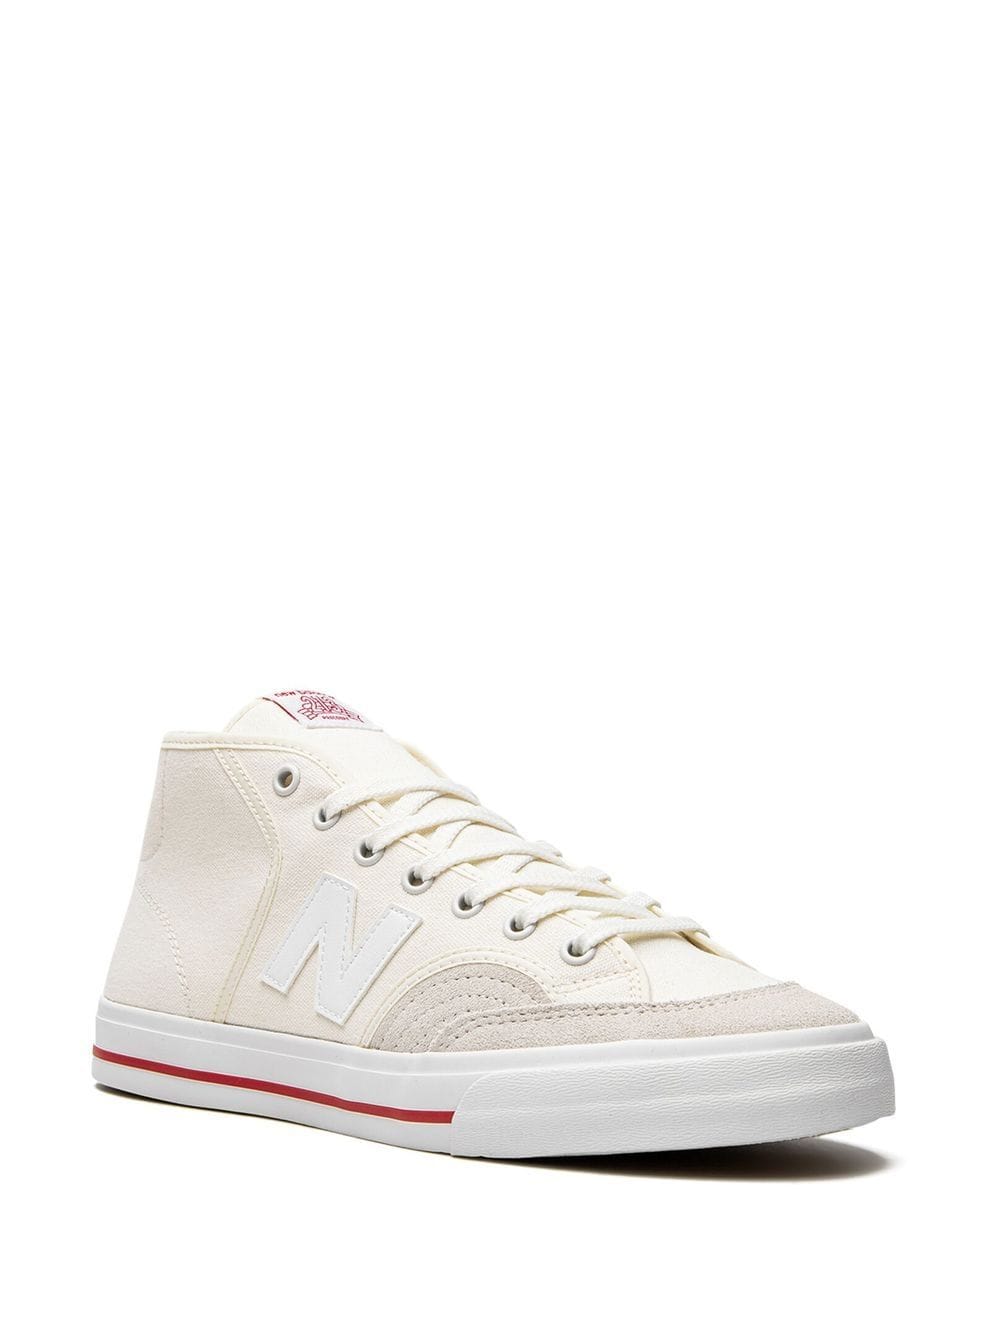 Image 2 of New Balance Numeric 213 Pro Court sneakers